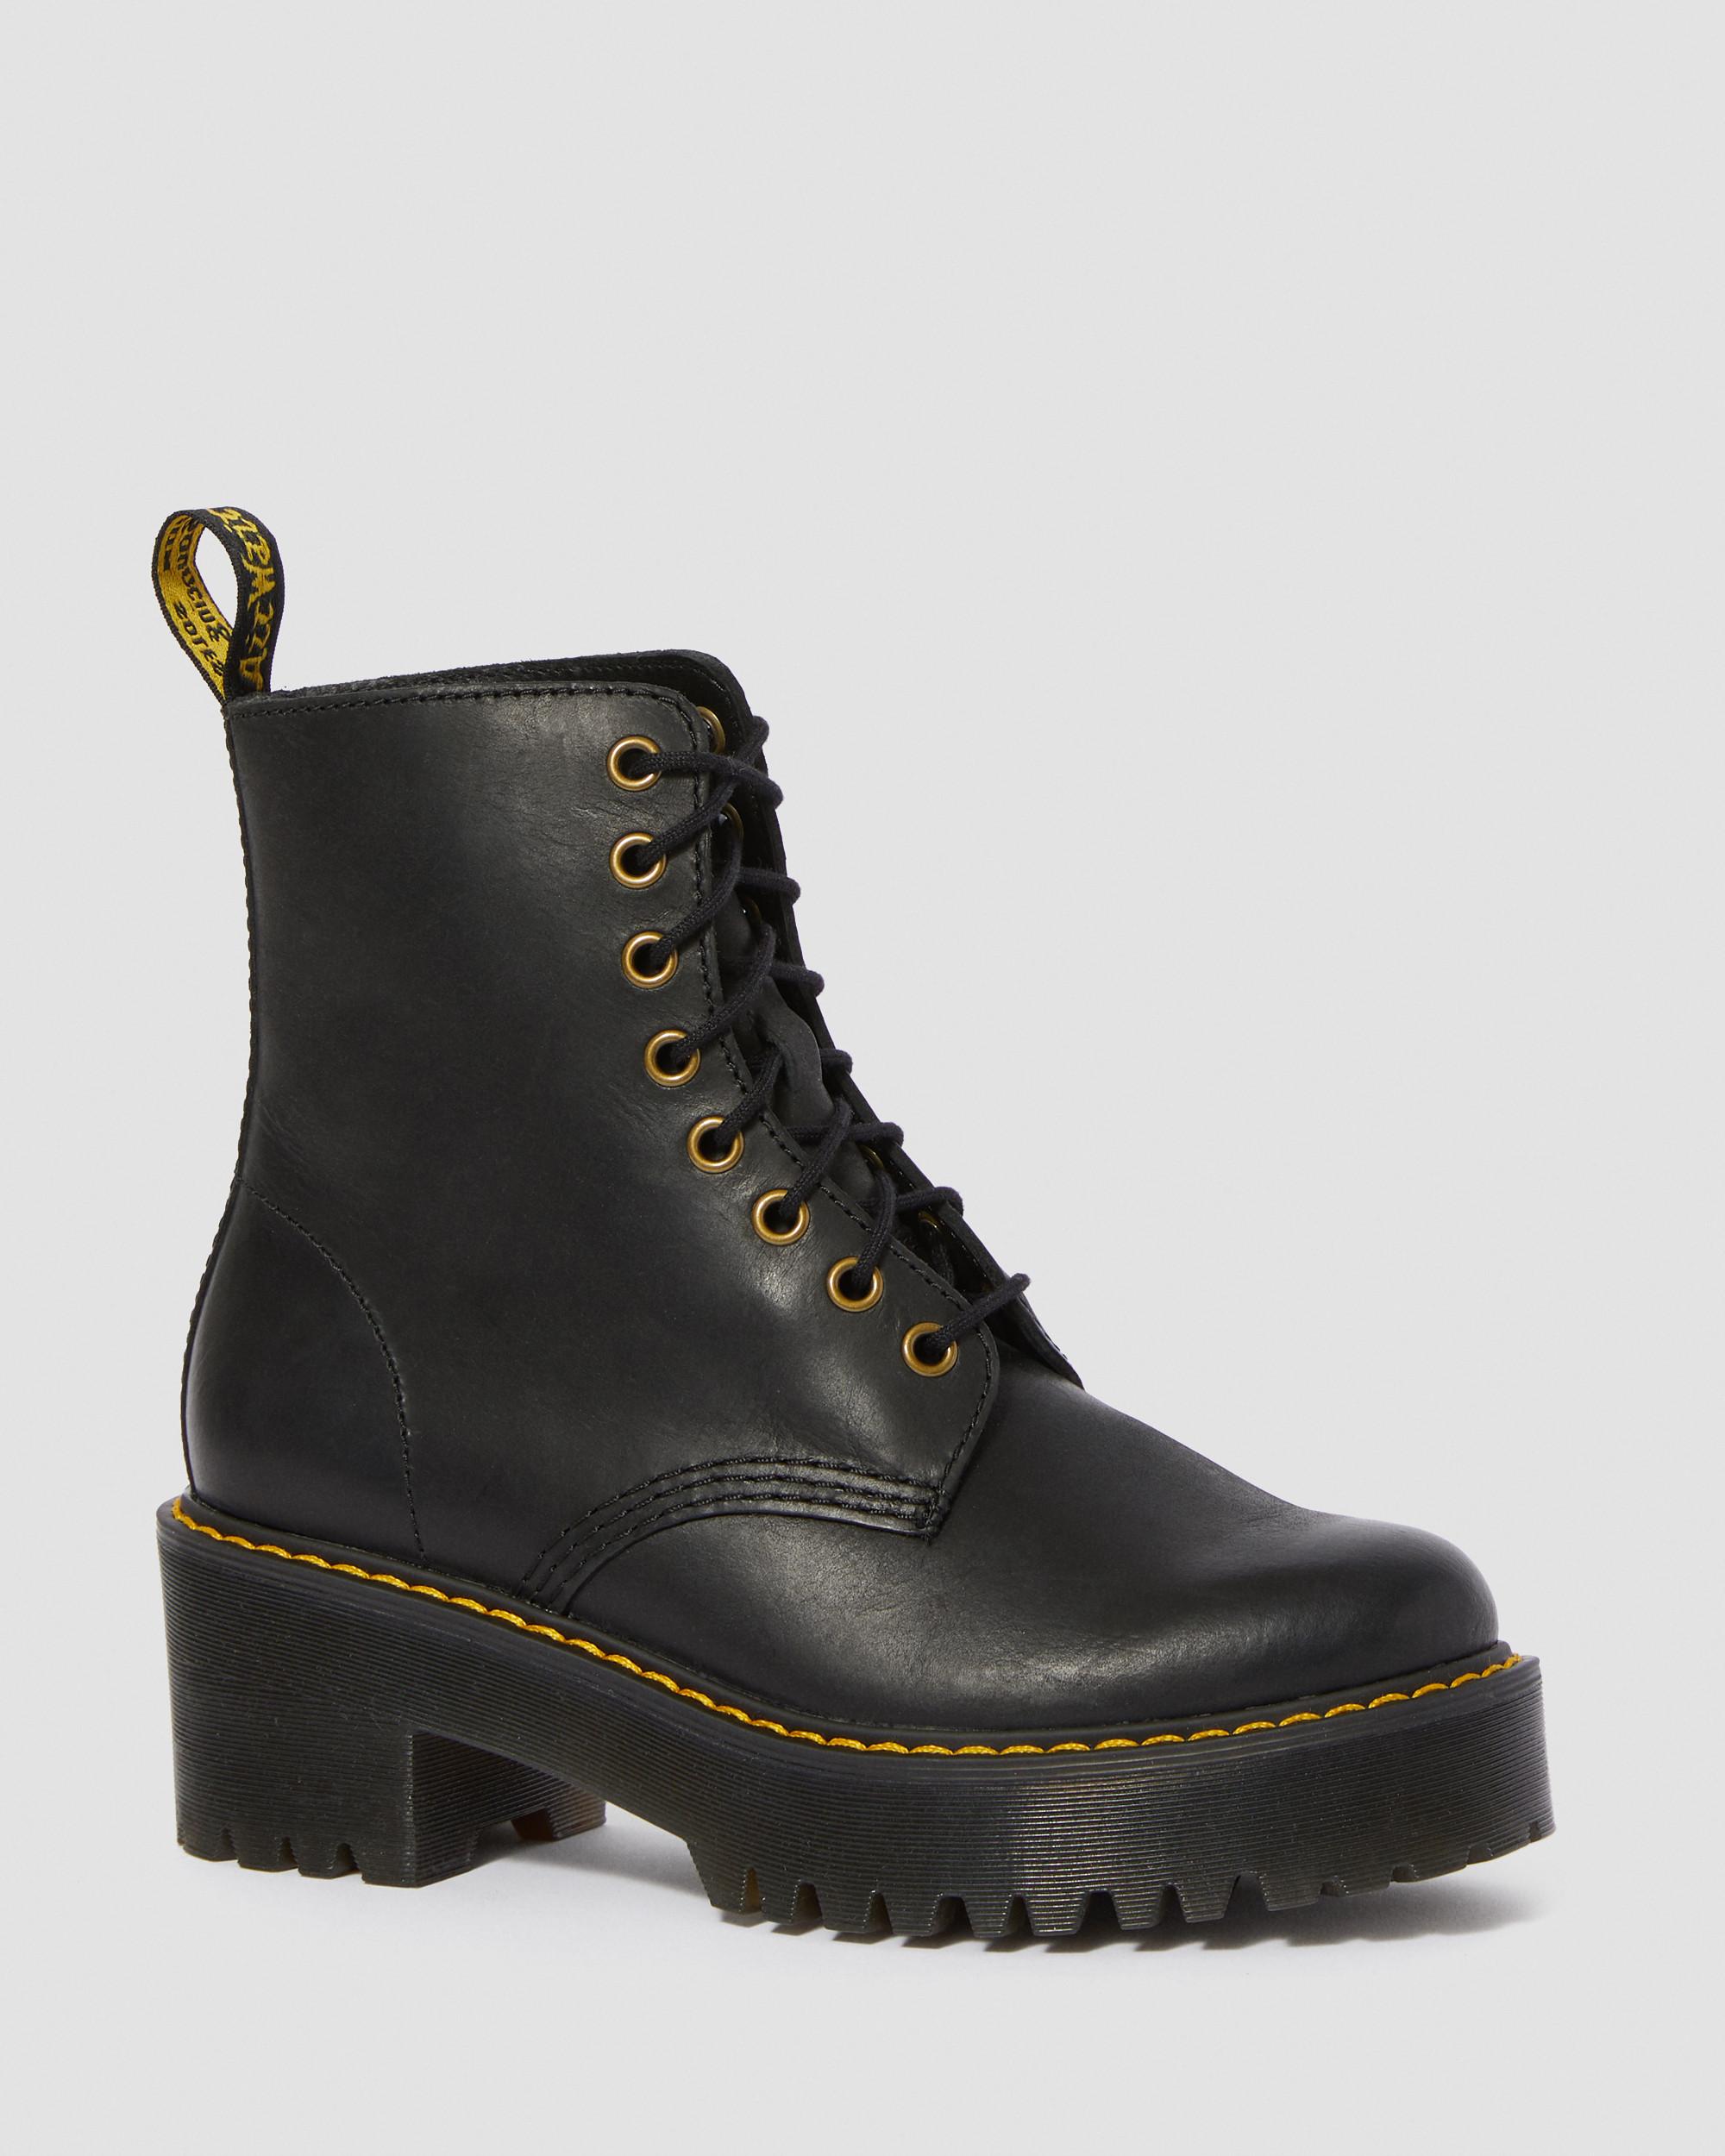 similar shoes to dr martens